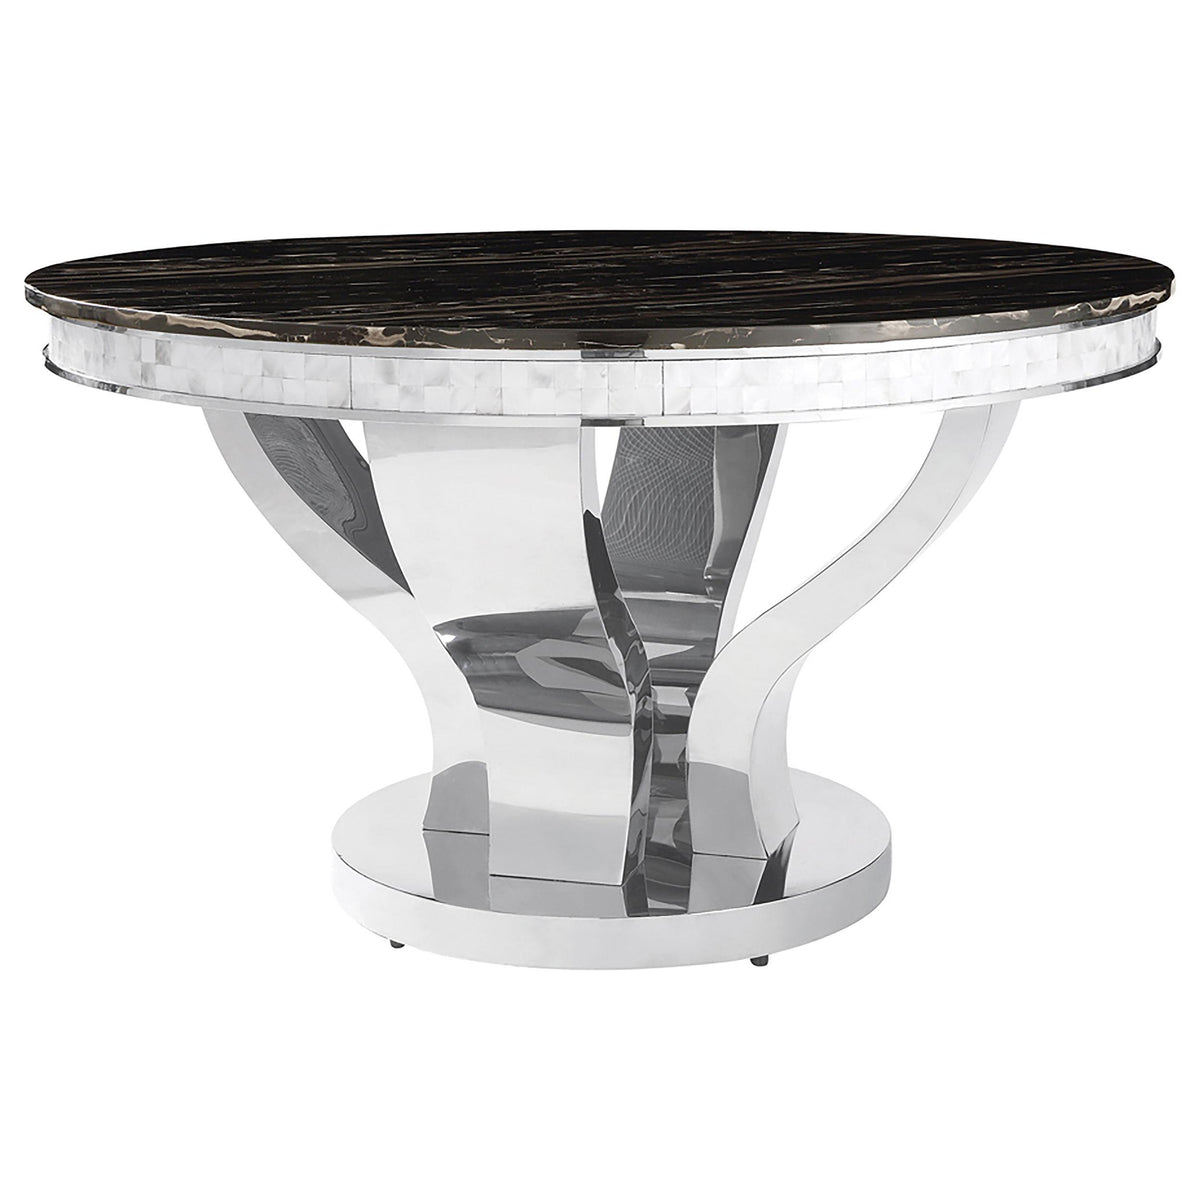 Anchorage Round Dining Table Chrome and Black  Las Vegas Furniture Stores